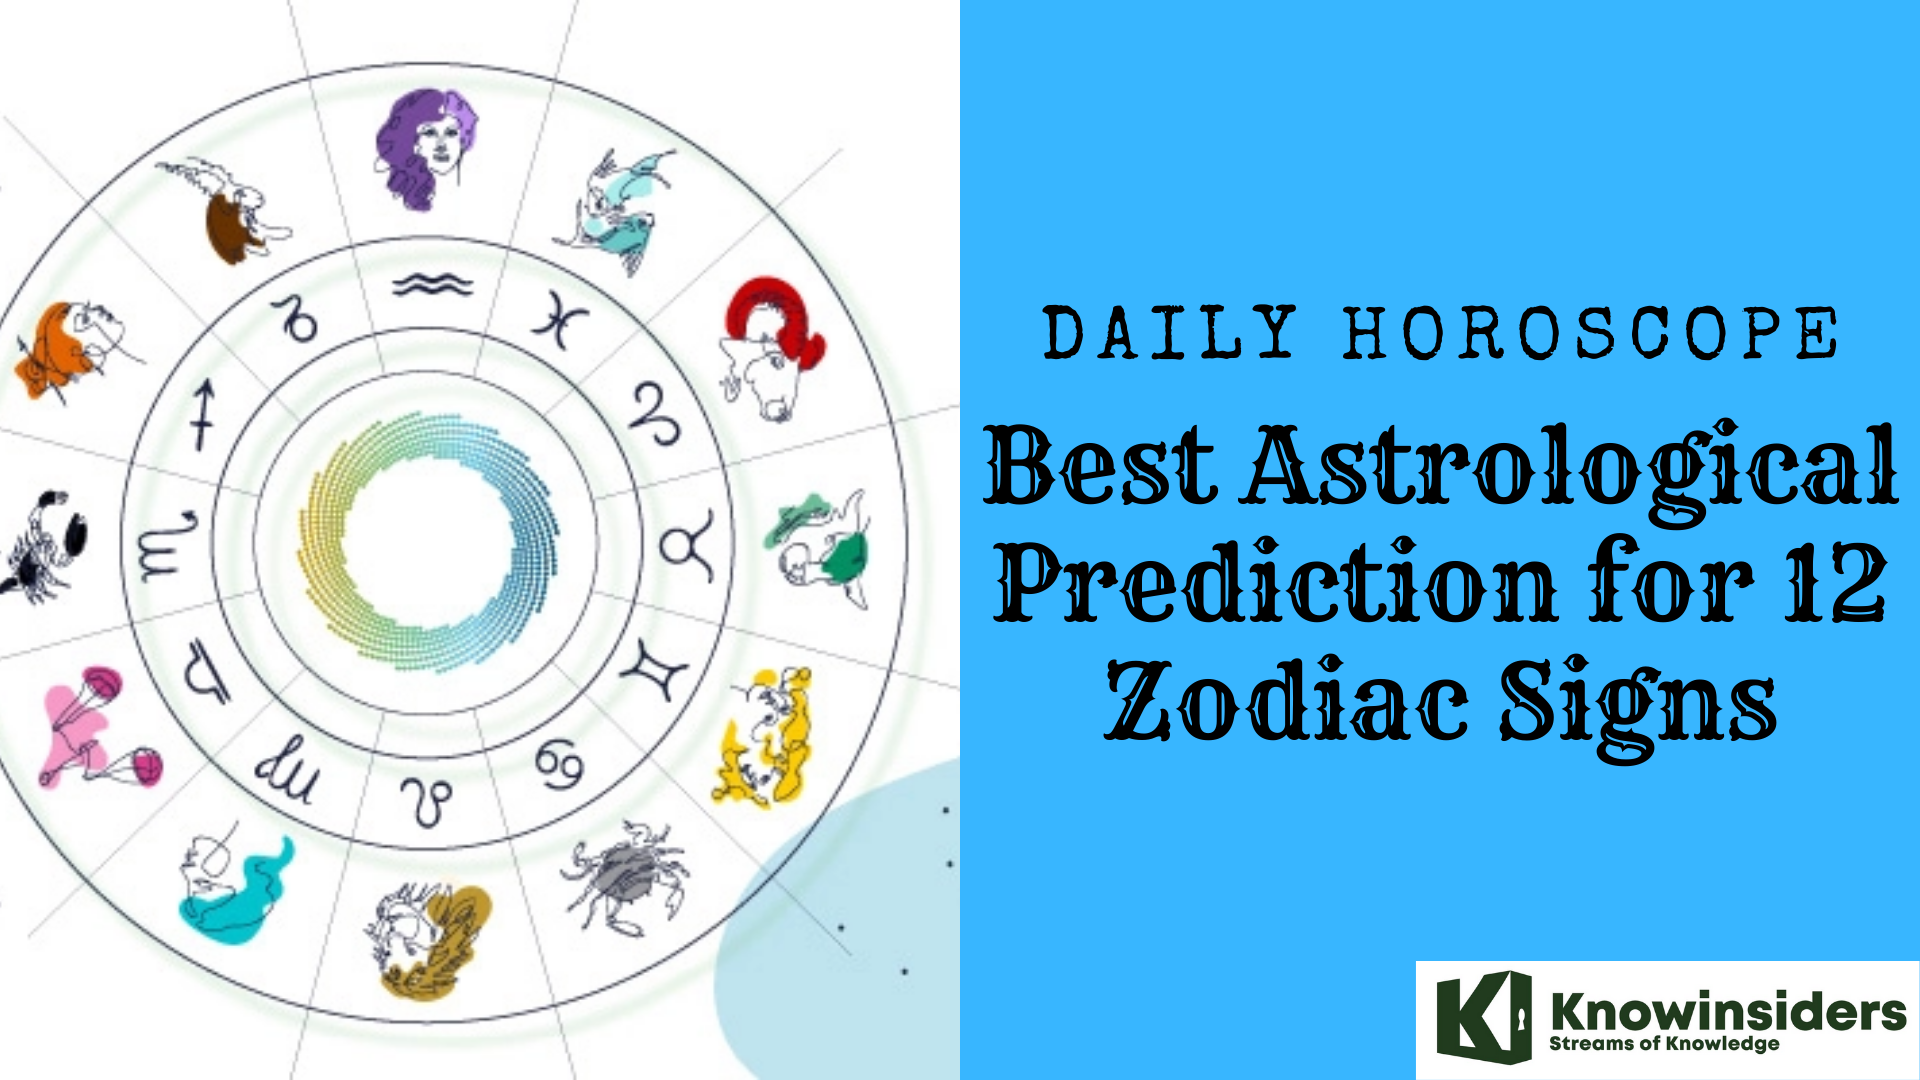 Daily Horoscope (June 6, 2022): Best Astrological Prediction for 12 Zodiac Signs